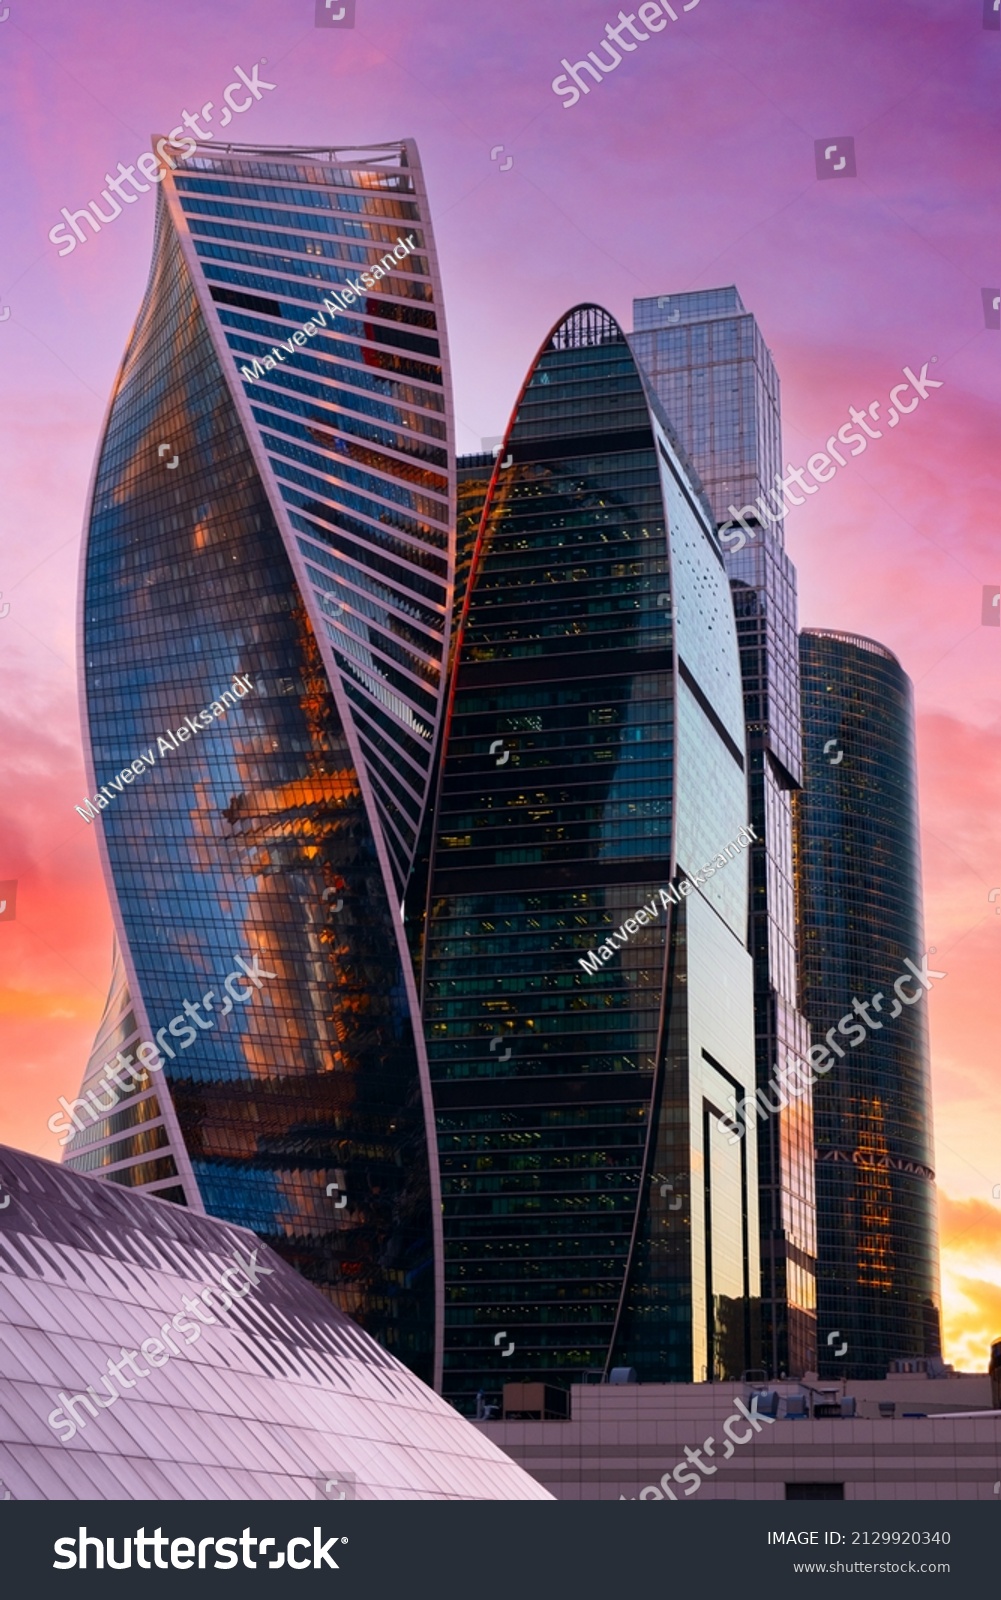 Tops of modern corporate buildings against the gloomy red sunset sky. high-rise buildings and skyscrapers Moscow International Business Center. #2129920340